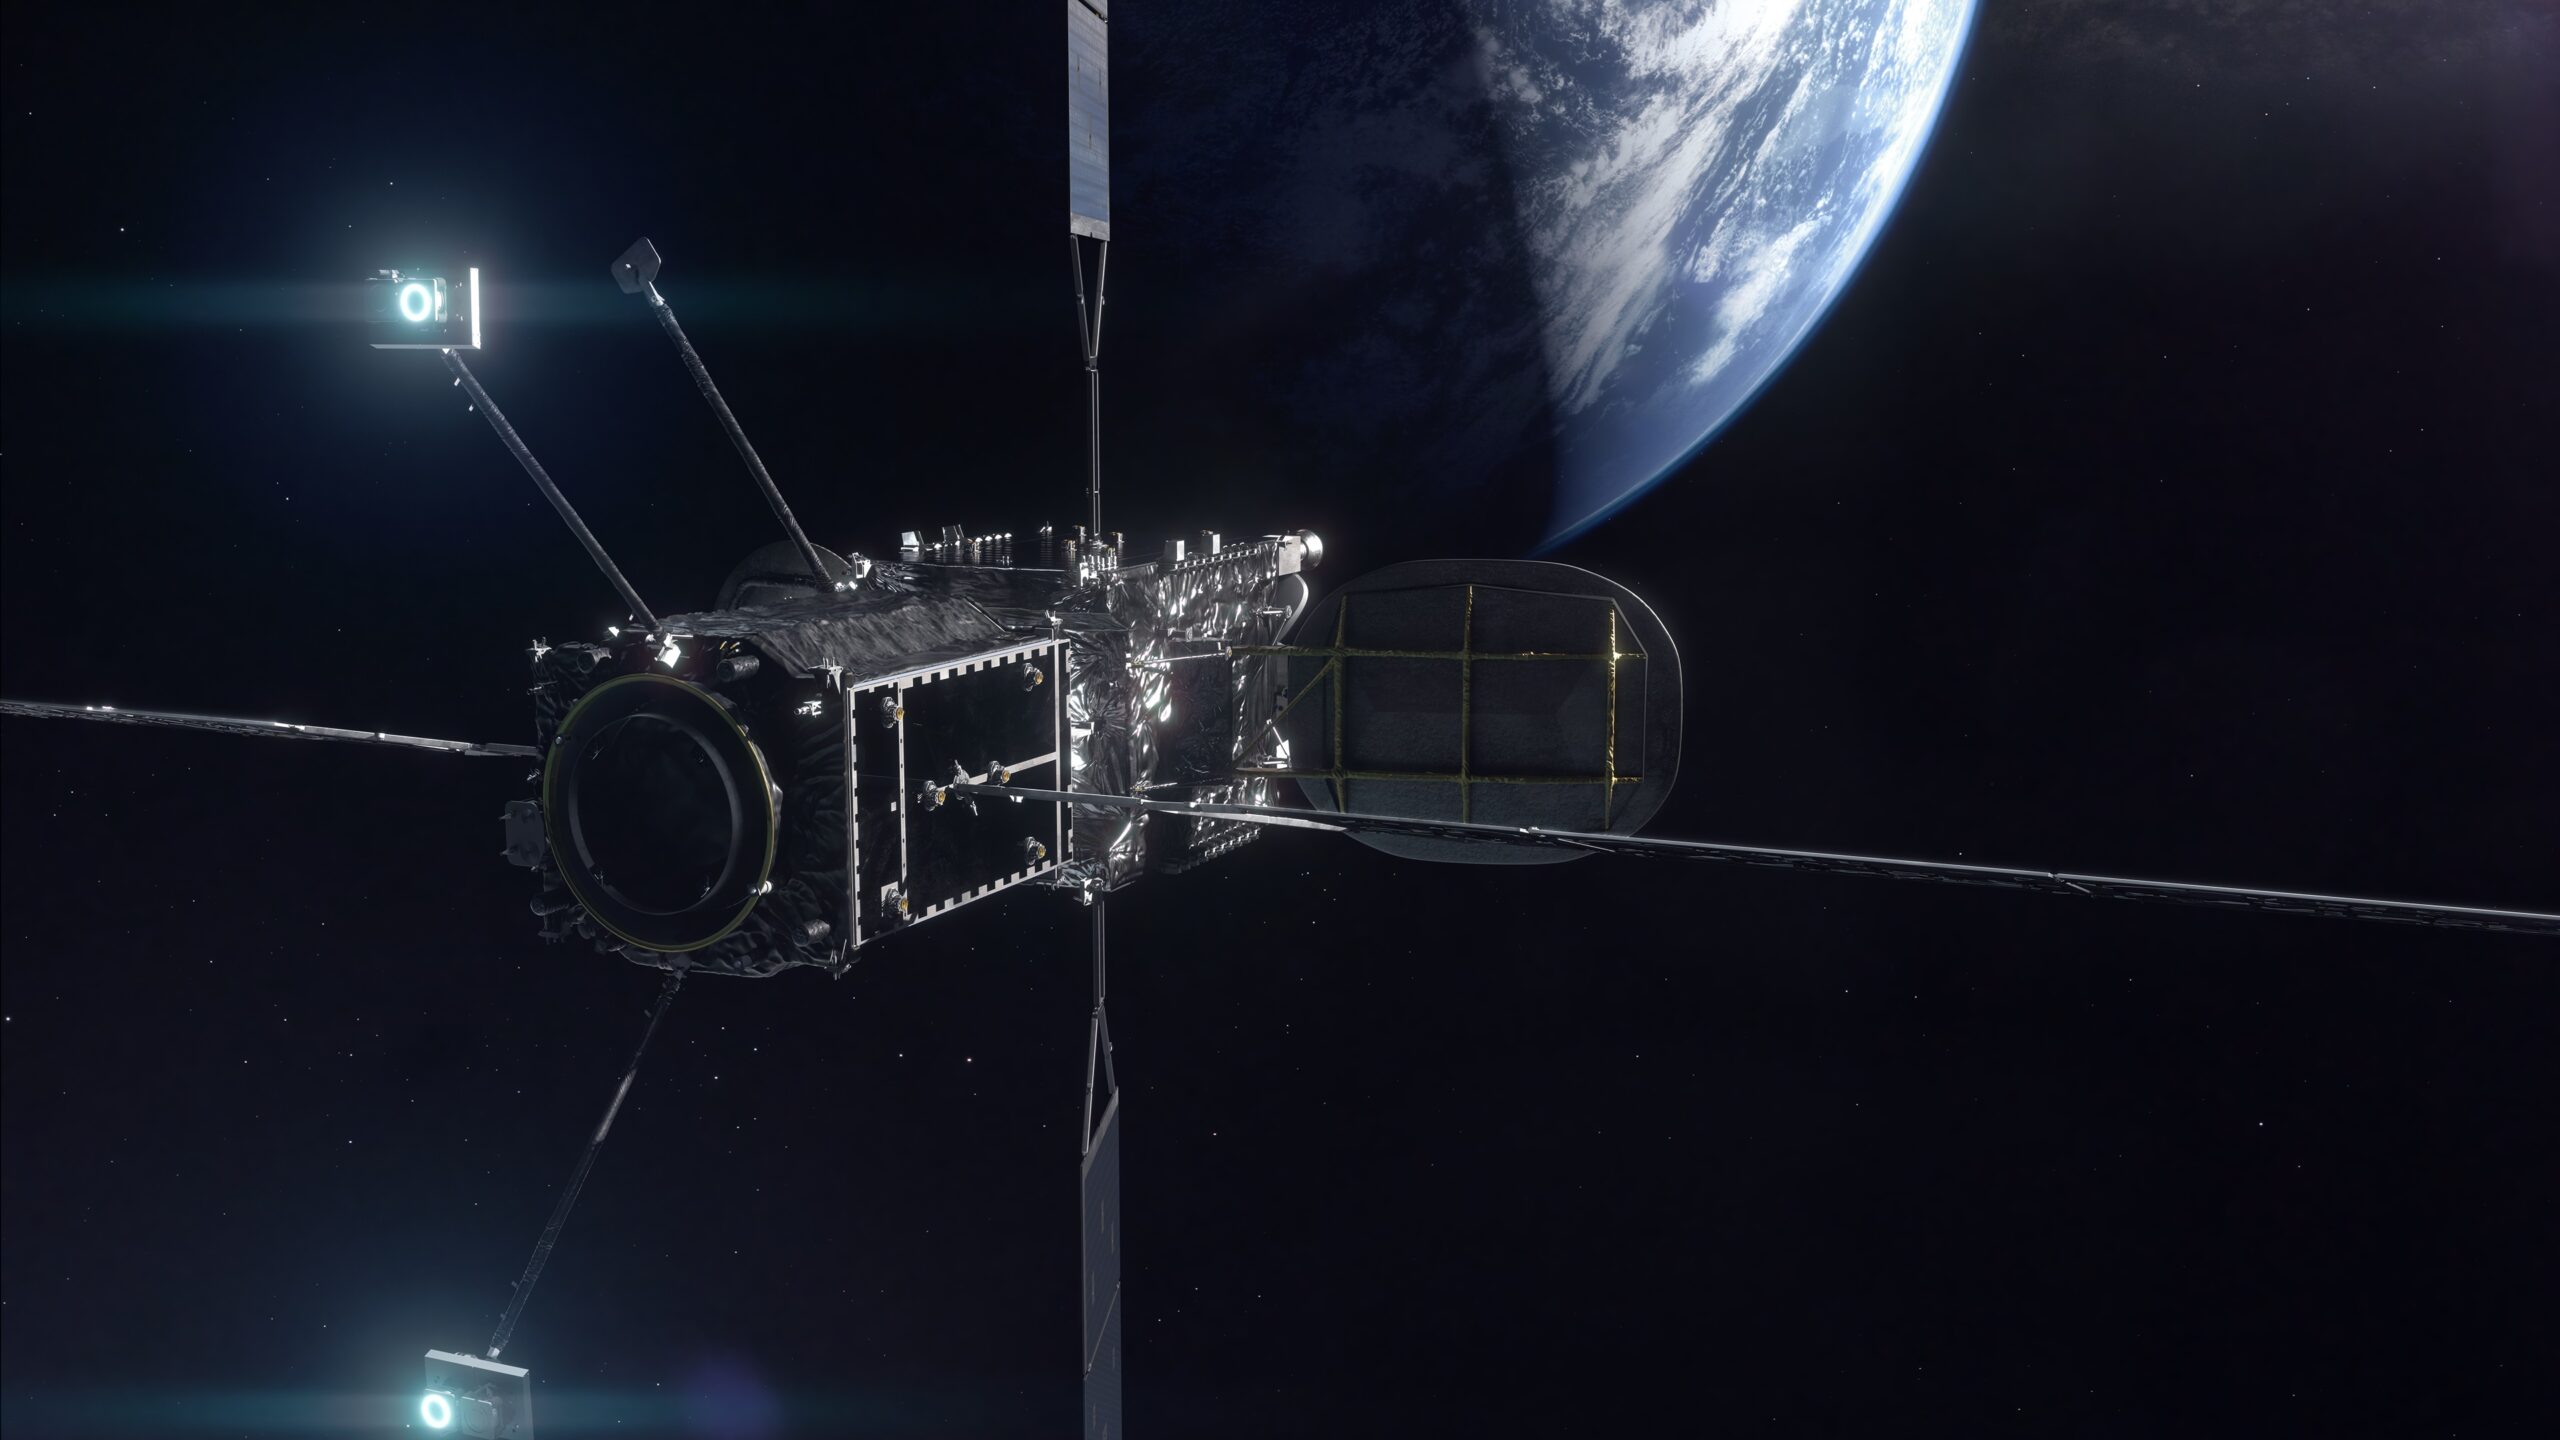 After technical demonstrations, satellite servicing grapples other issues thumbnail